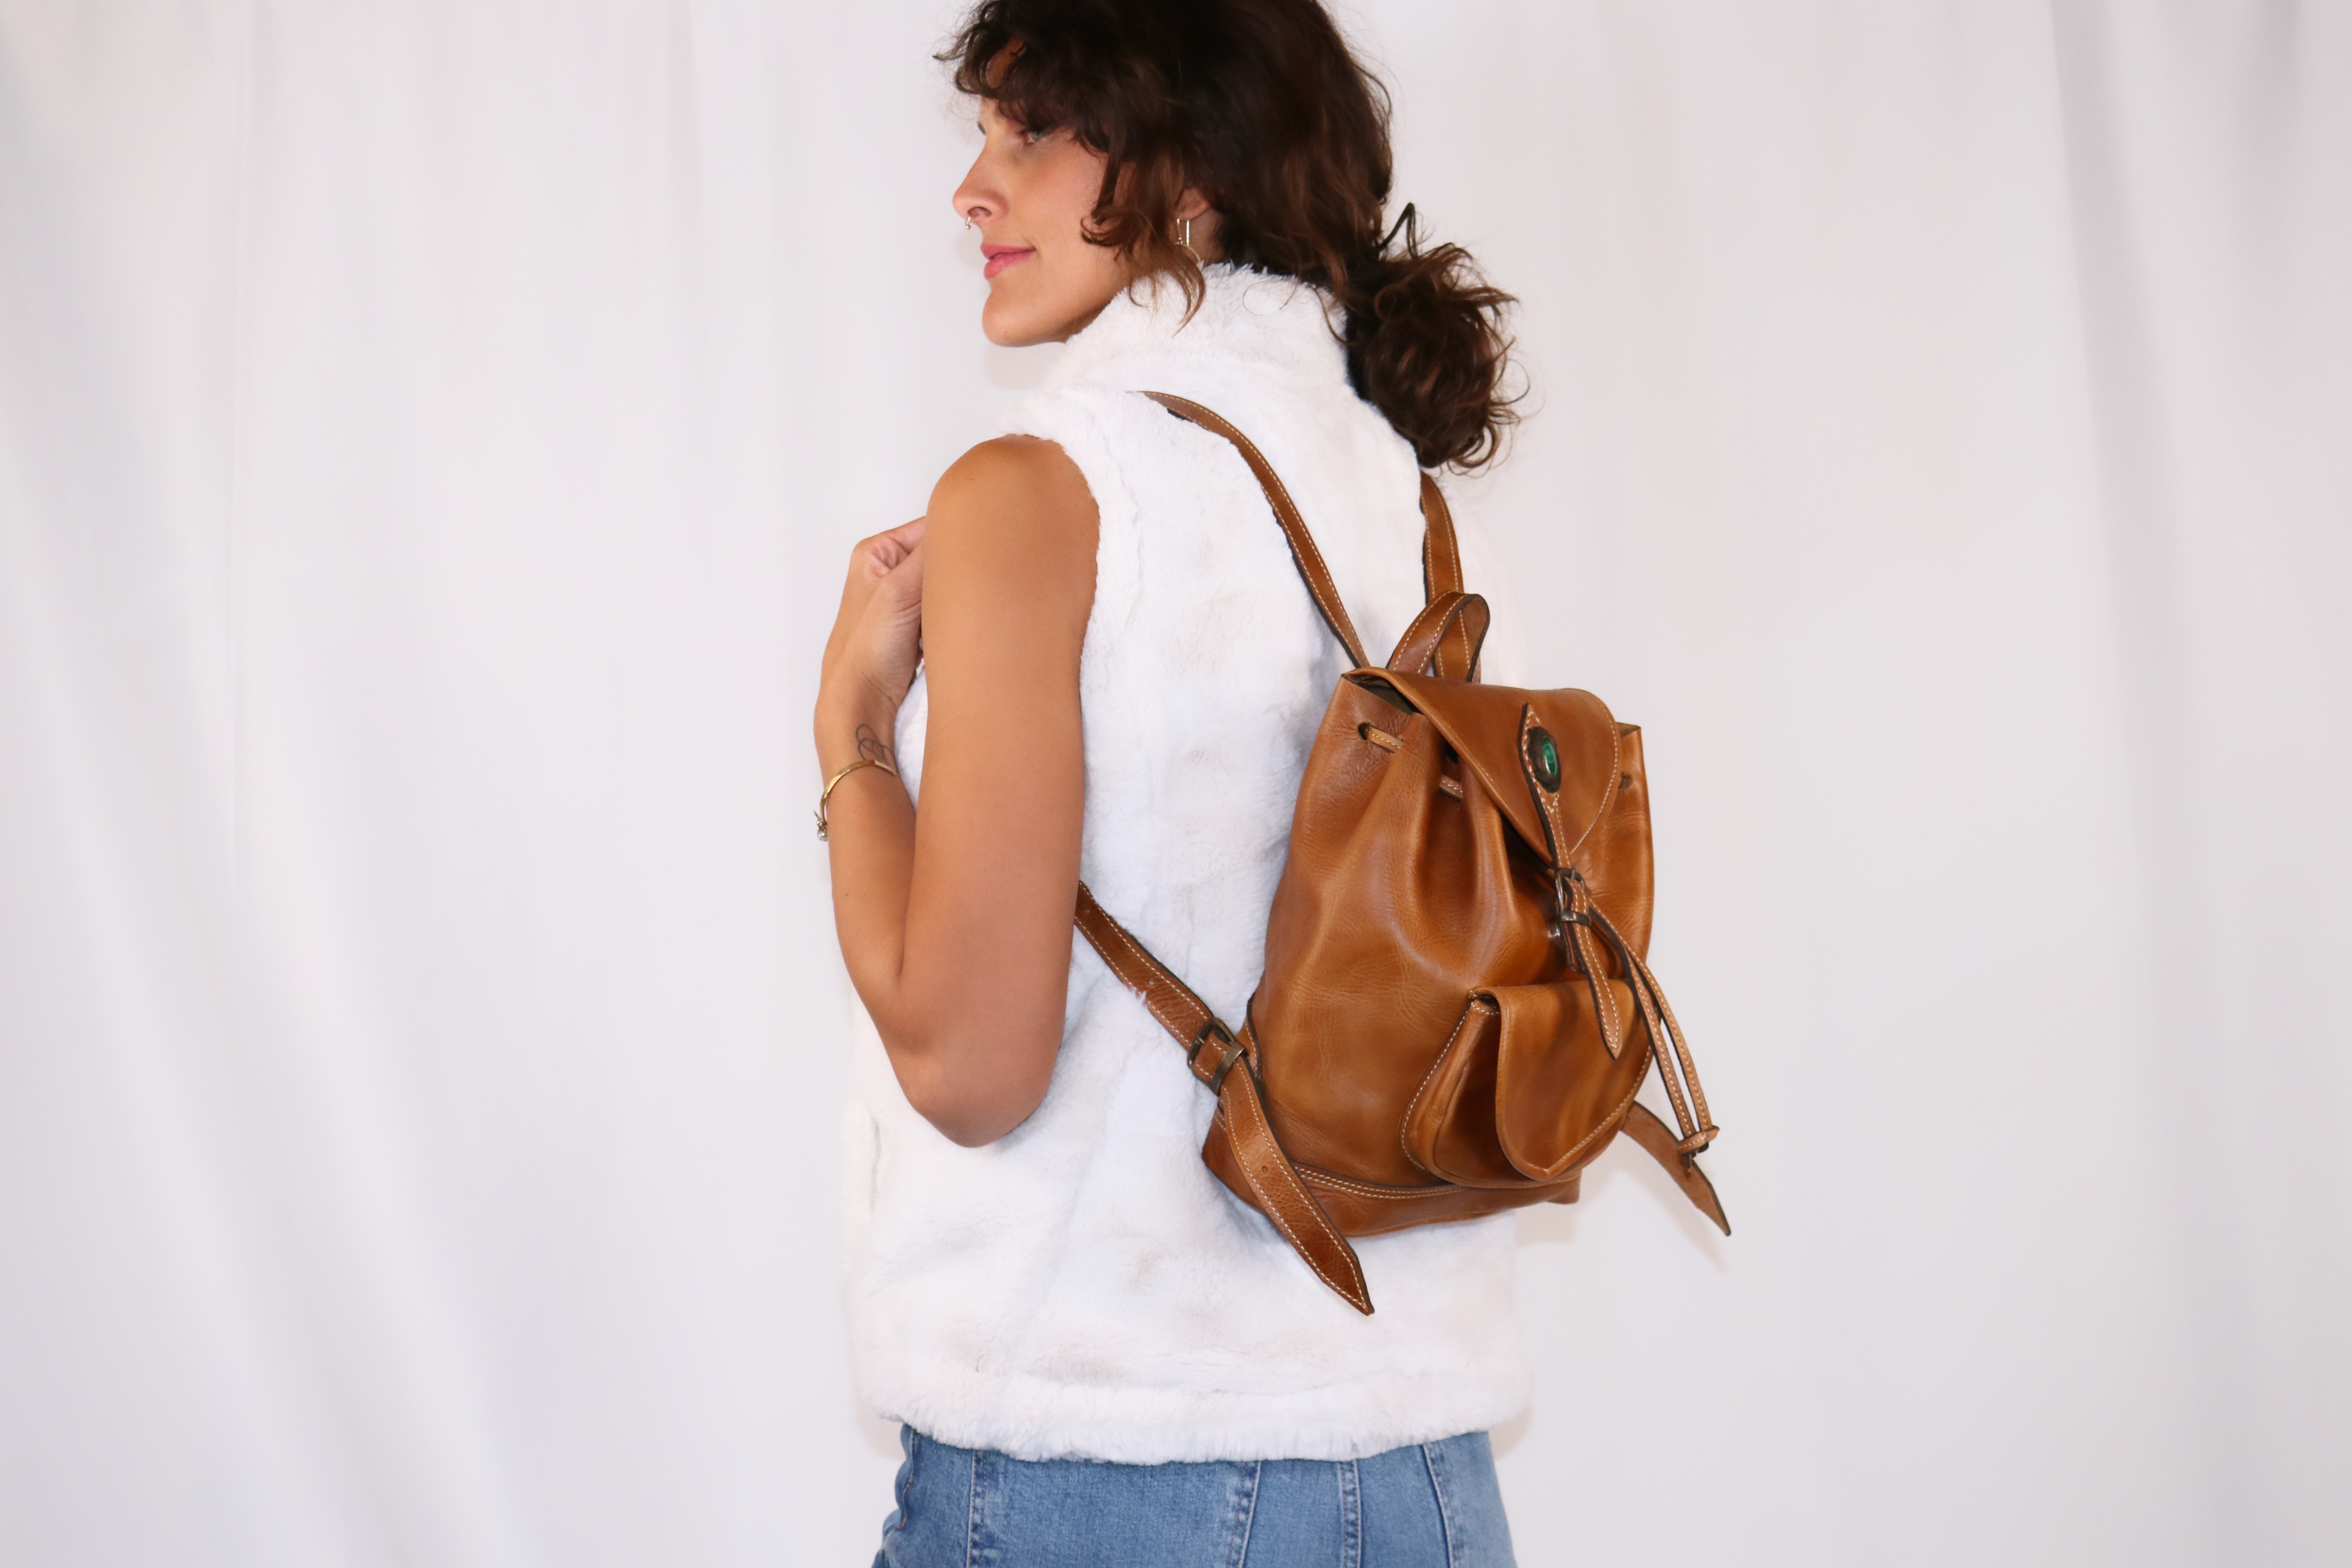 Stone & Leather Backpack